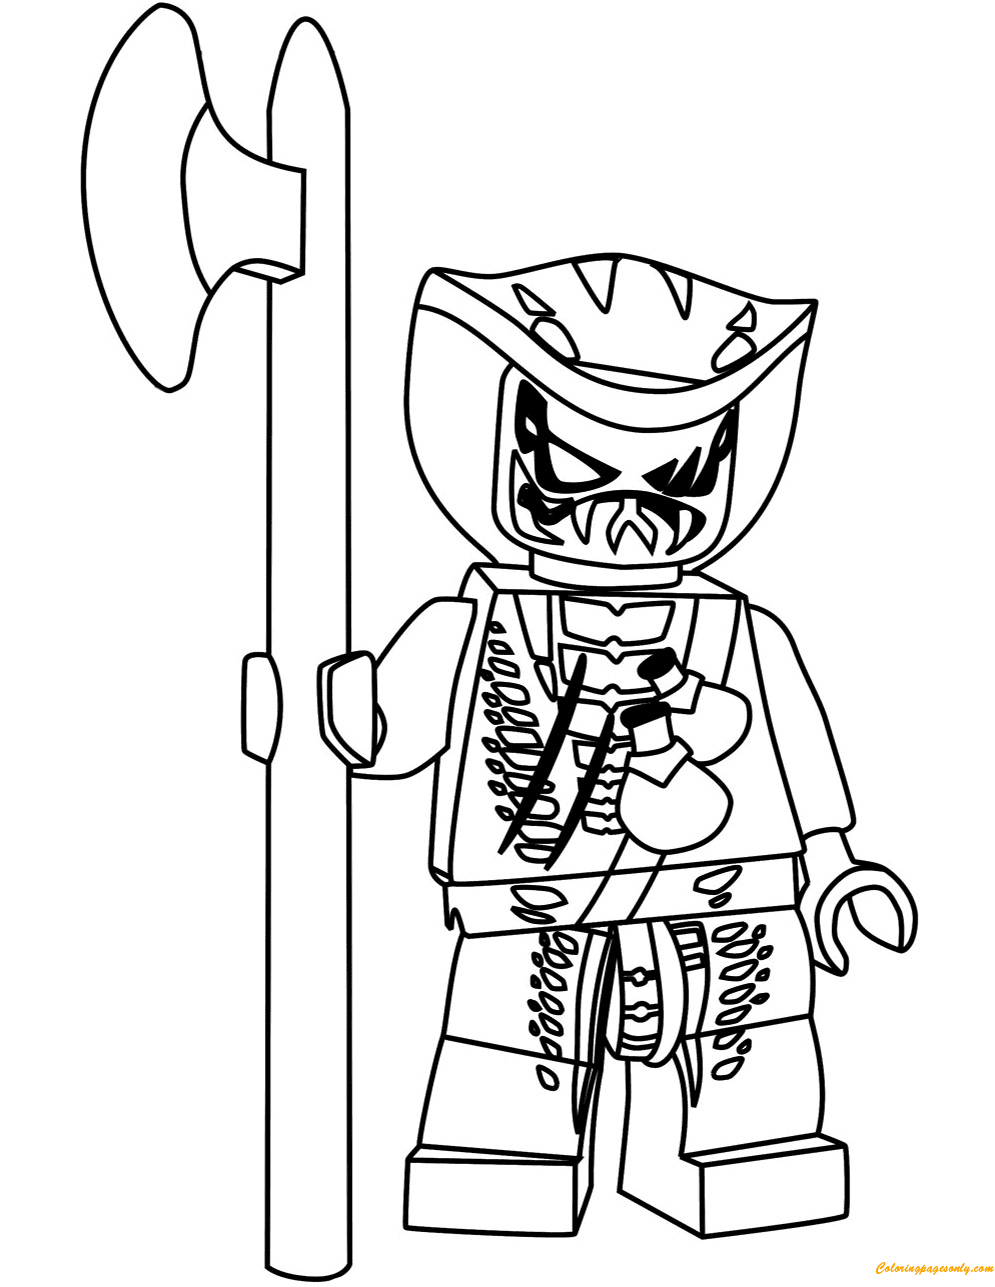 Ninjago Coloring Pages   Coloring Pages For Kids And Adults